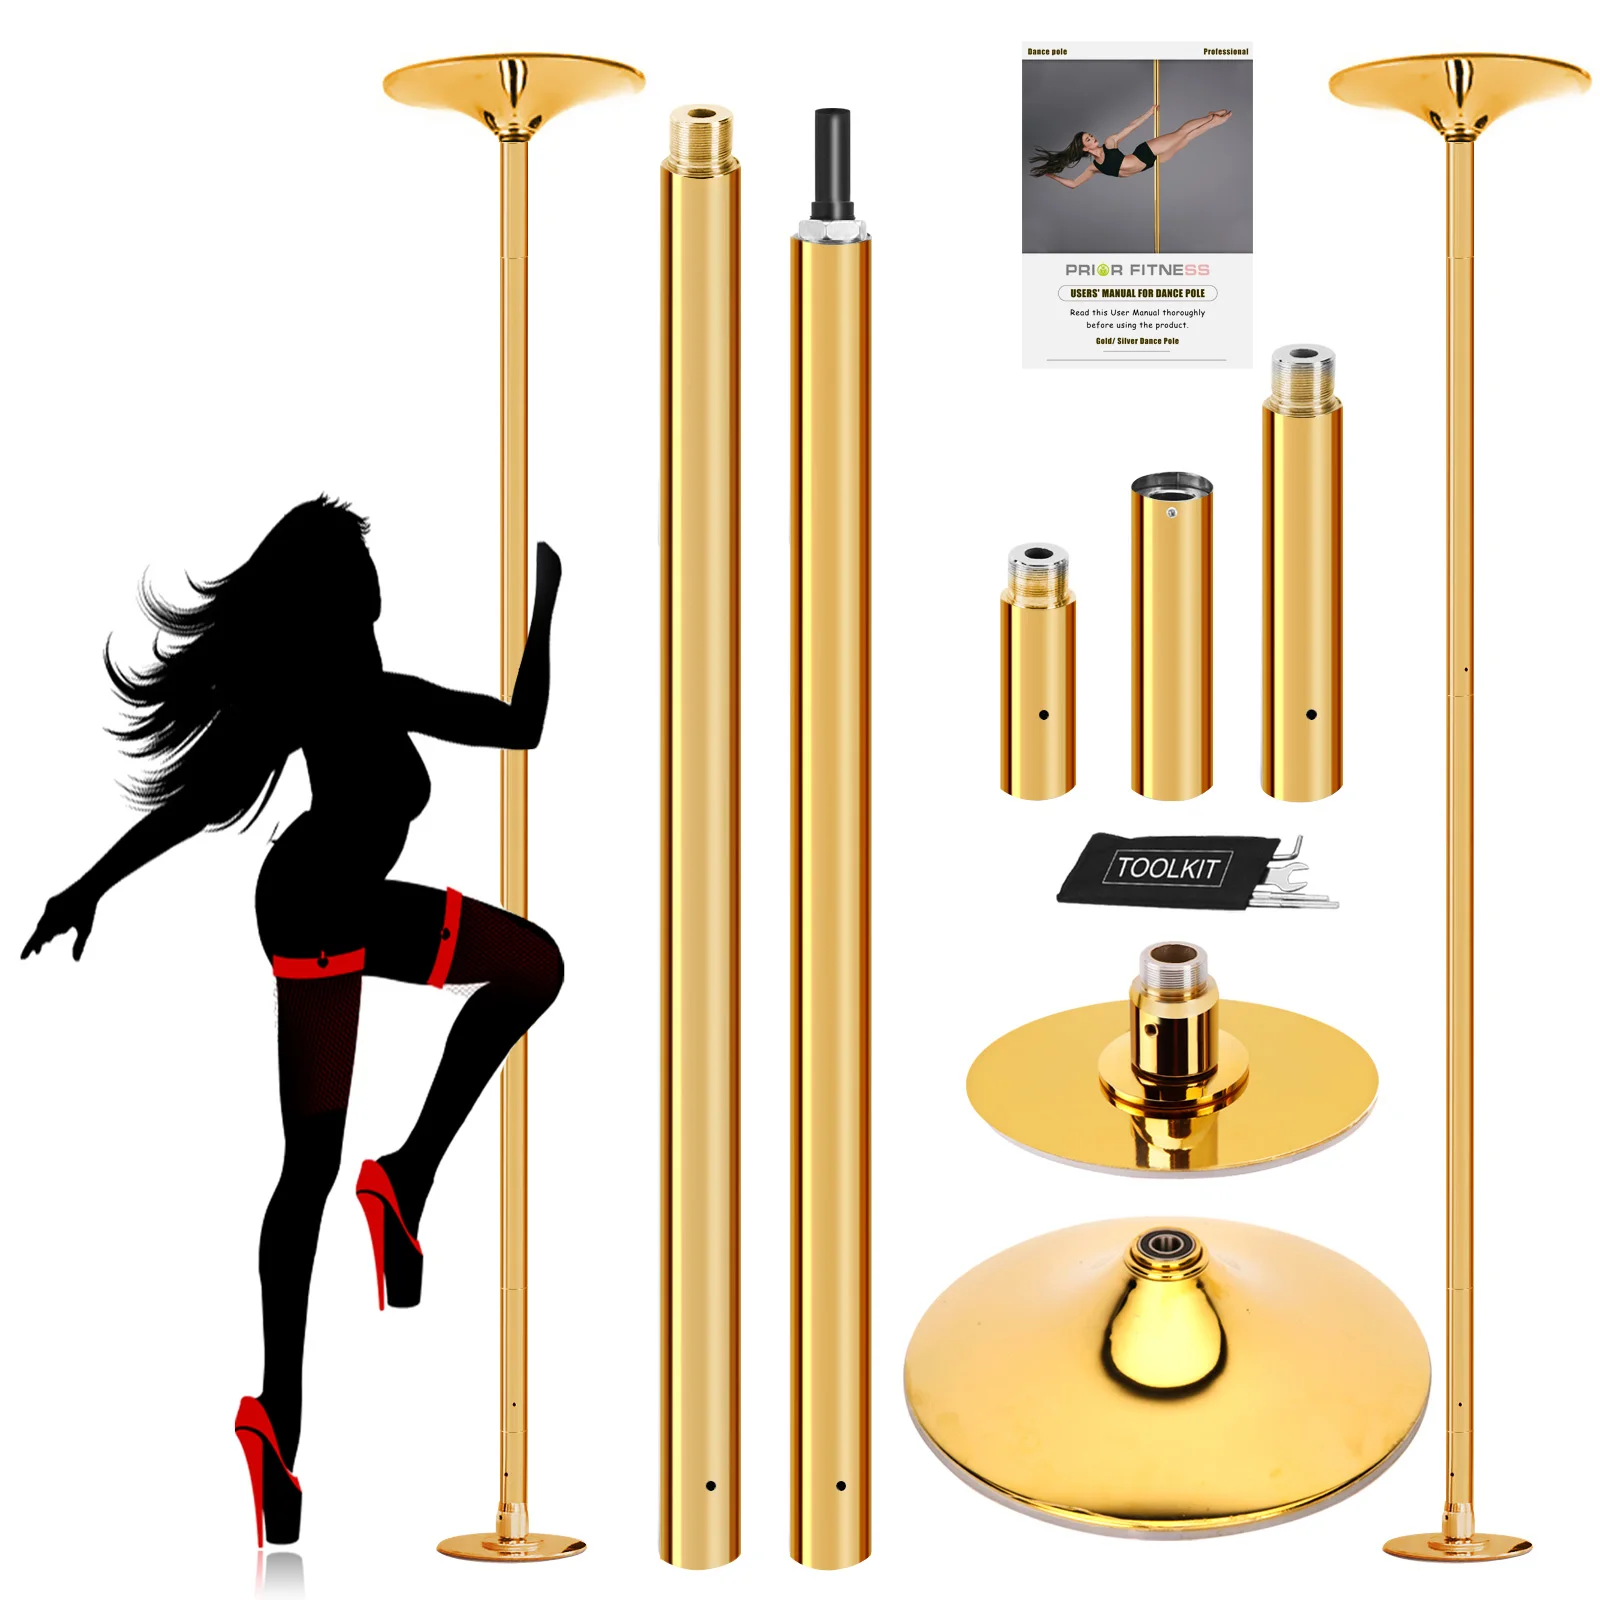 PRIOR FITNESS Portable 45mm Stripper Pole Static Rotatable Dance Pole Detachable Fitness Pole Dance For Home Dance and Gym